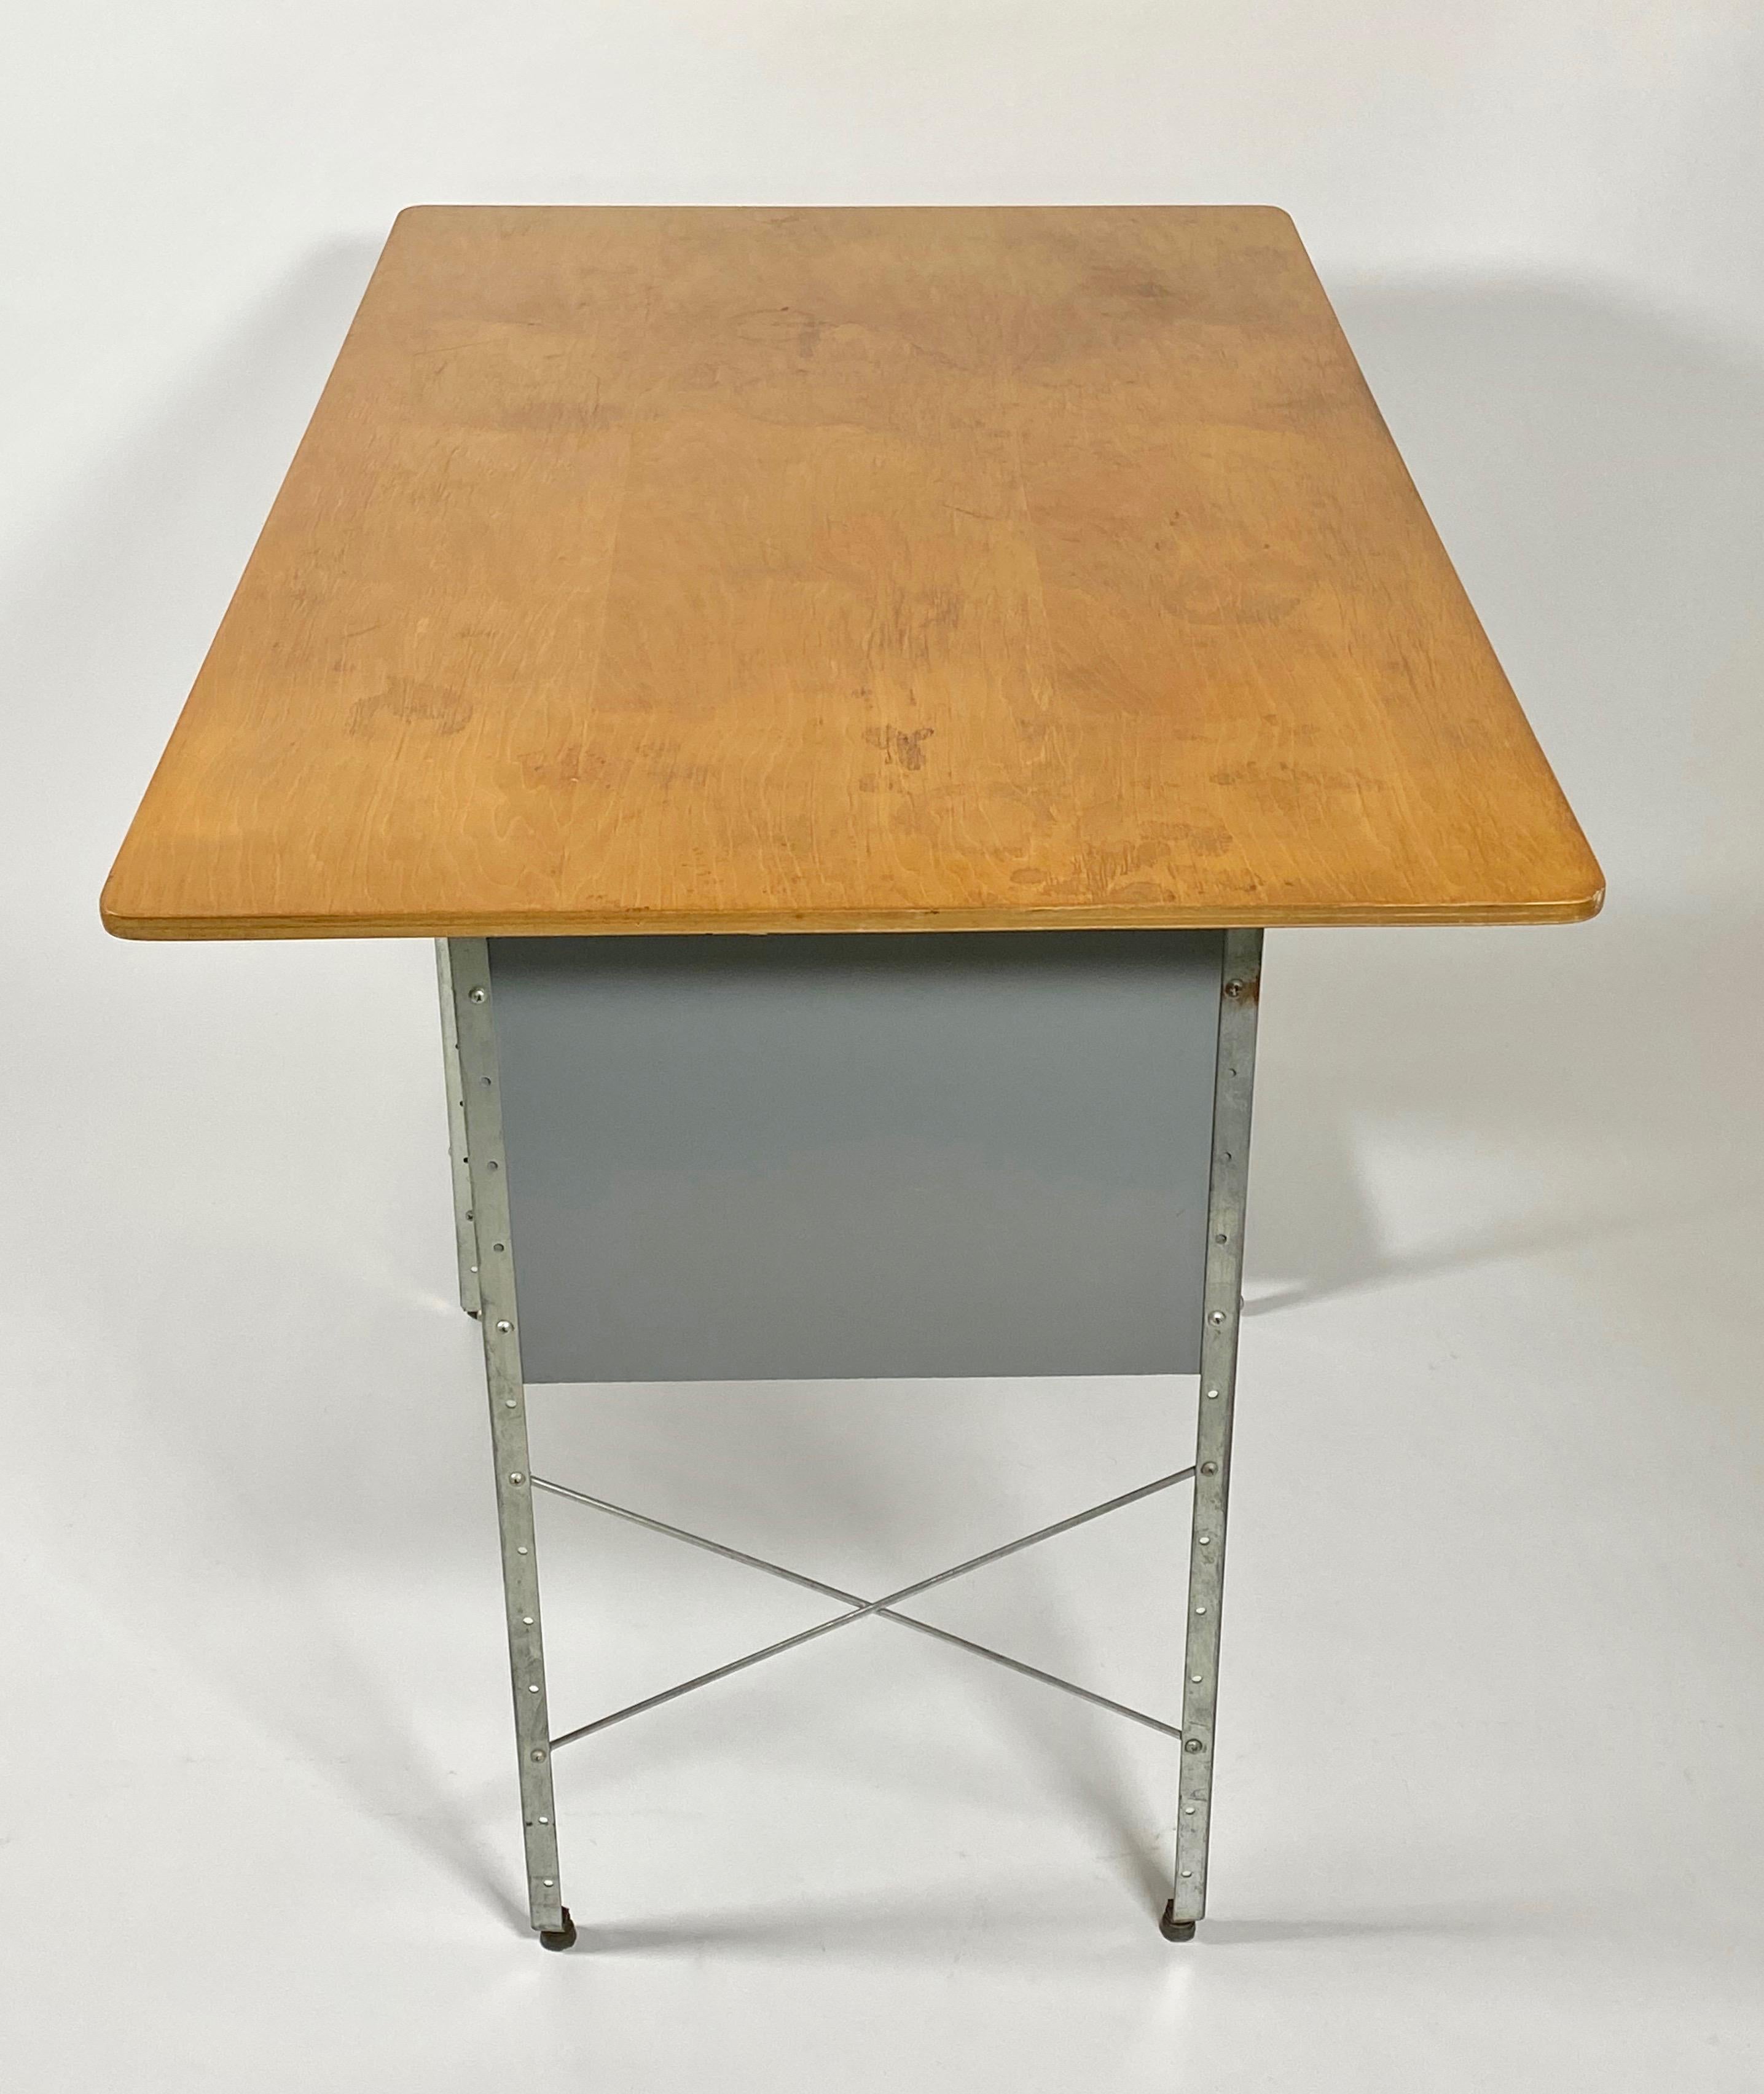 Steel 1st Generation ESU D-10-N Desk by Charles and Ray Eames